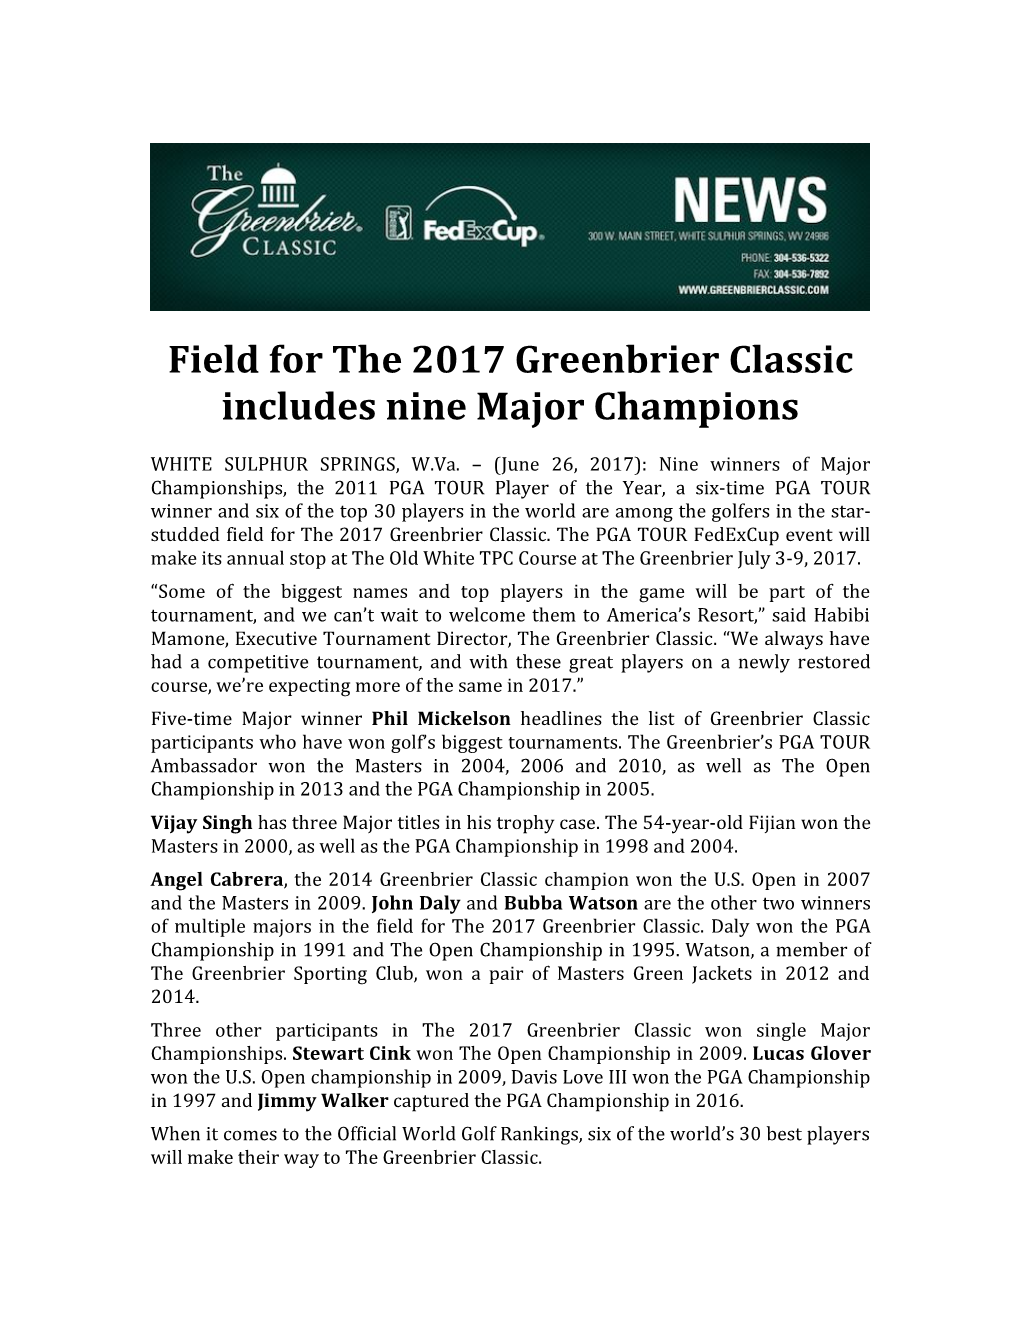 Field for the 2017 Greenbrier Classic Includes Nine Major Champions